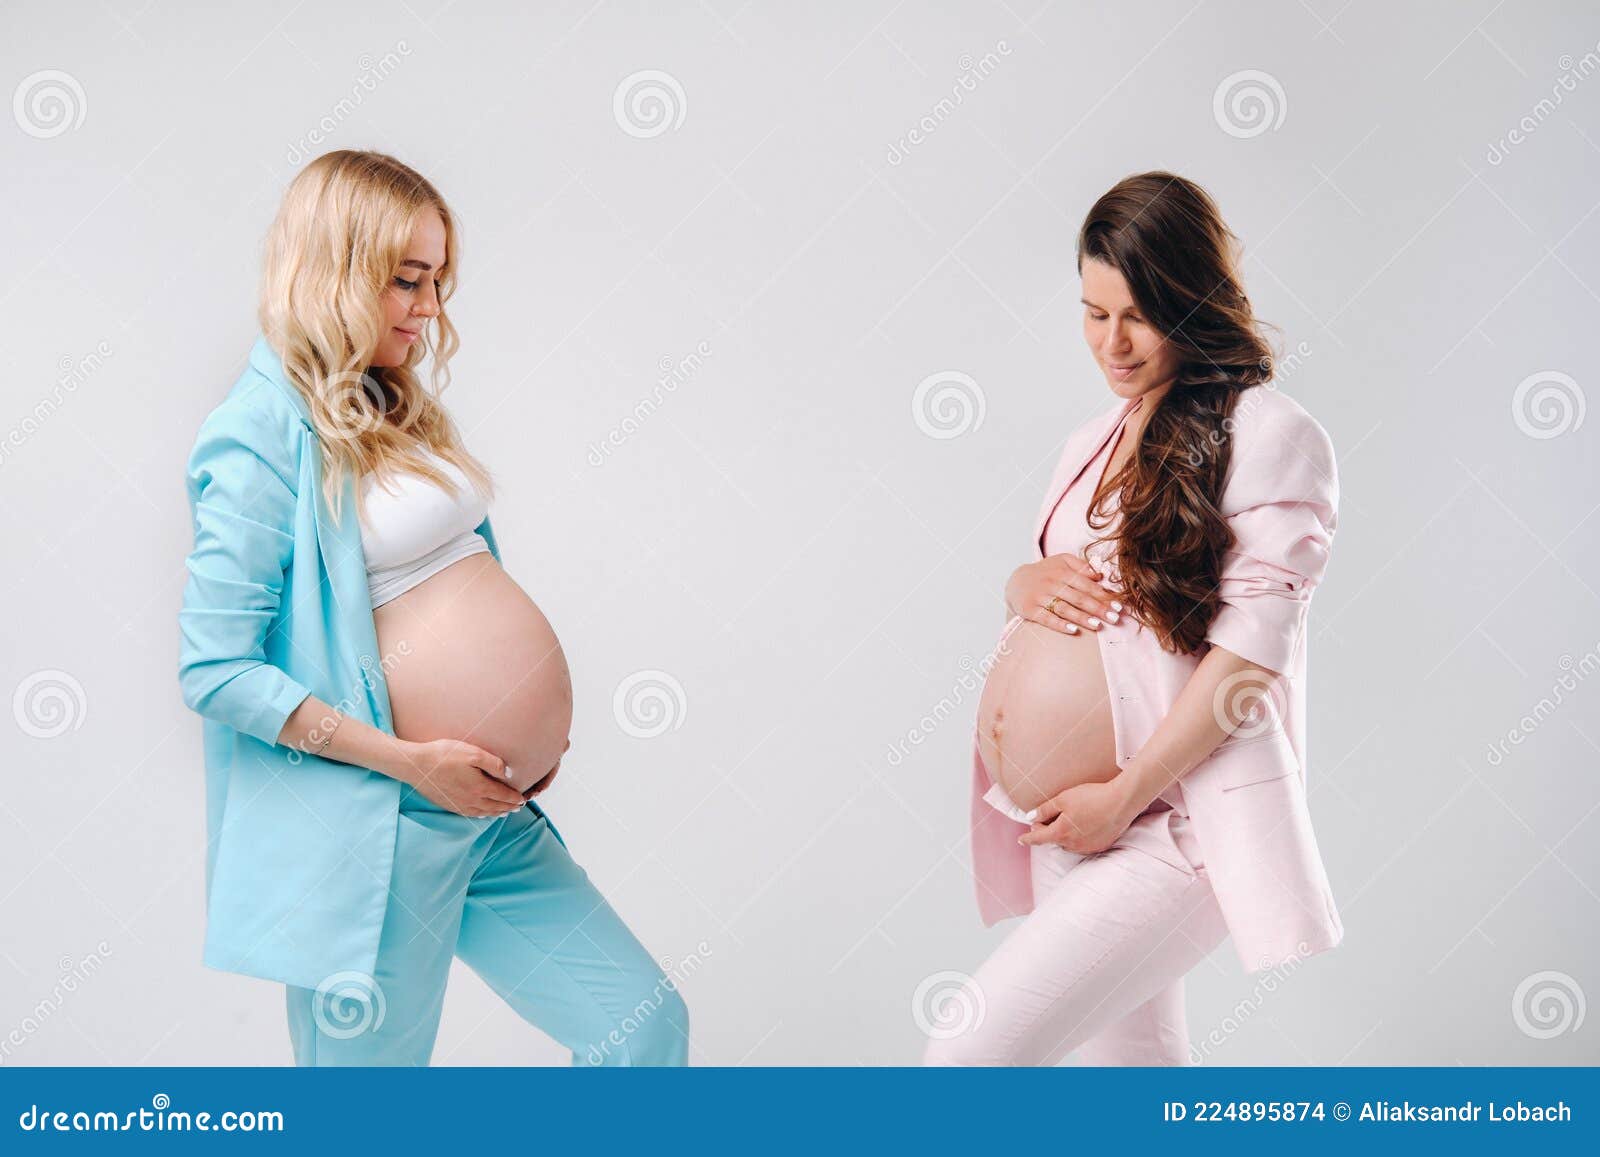 two pregnant women big bellies suits gray background two pregnant women big bellies suits gray 224895874